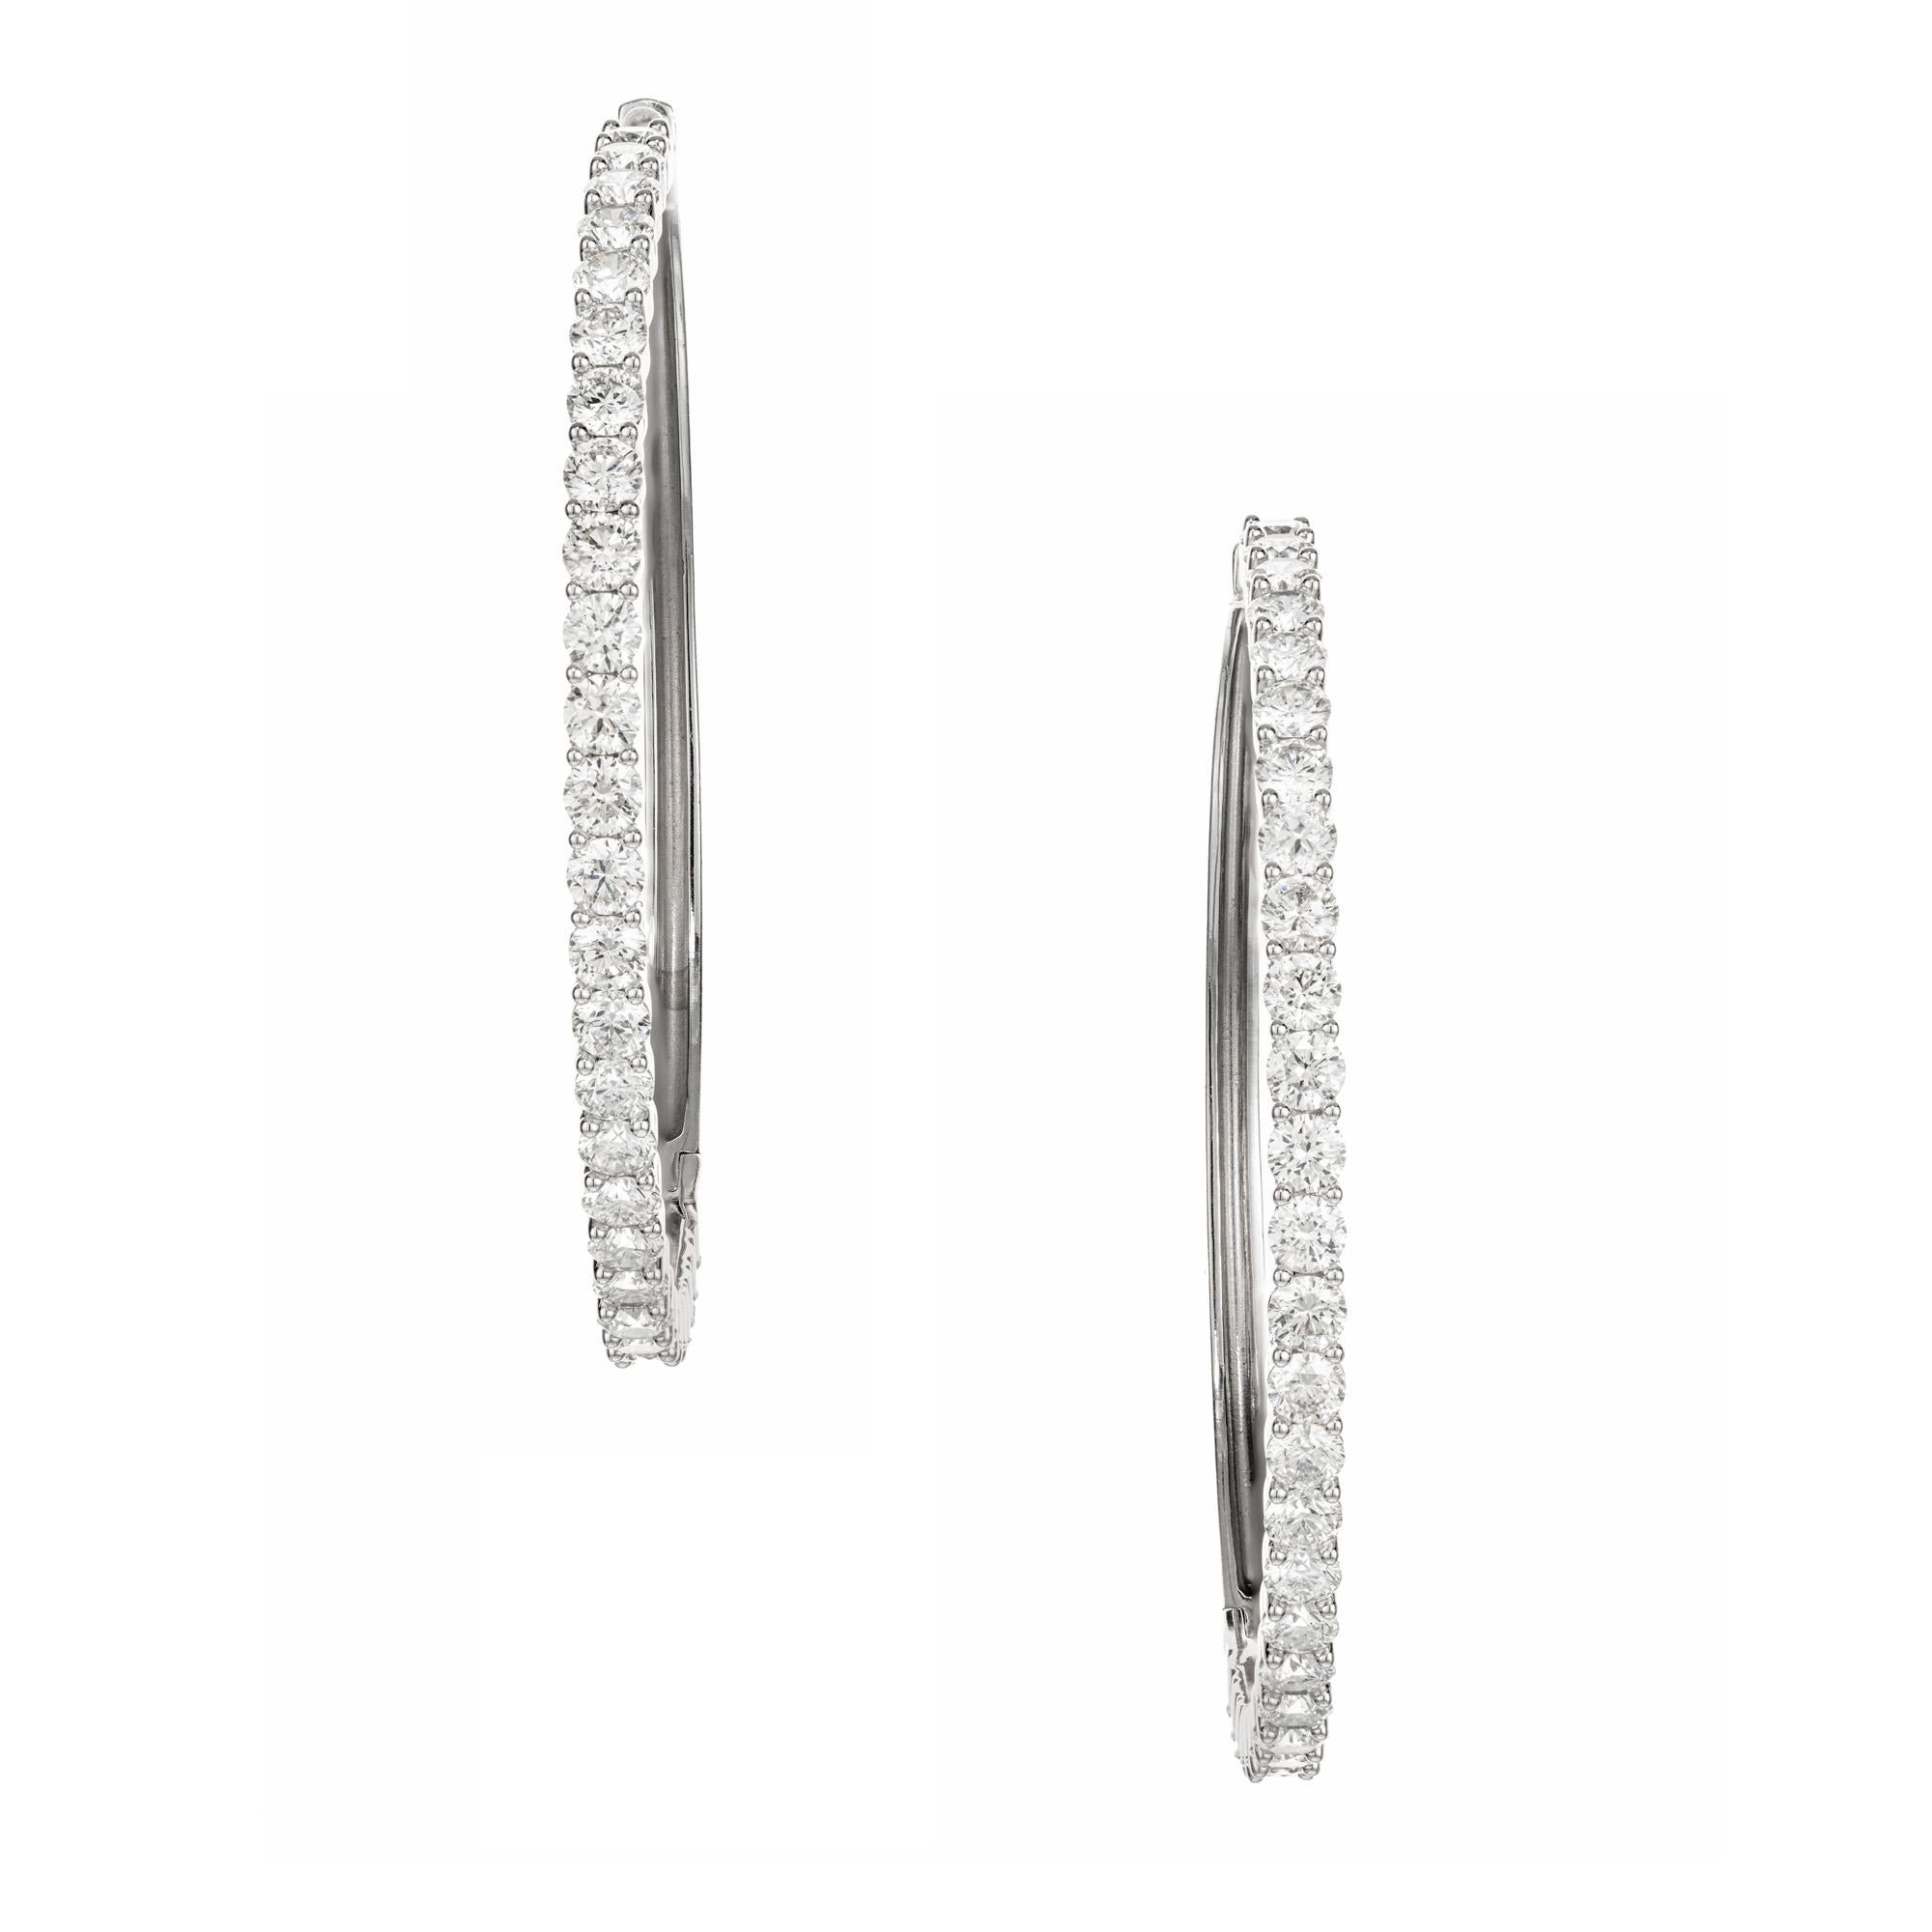 Just under 2 Inch diameter 4.00 carat diamond large hoop earrings. Set in 14k white gold with 56 round brilliant cut diamonds. 

56 round brilliant cut diamonds, G VS approx. 4.00cts
14k whtie gold 
Stamped: 14k
11.3 grams
Top to bottom: 48.3mm or